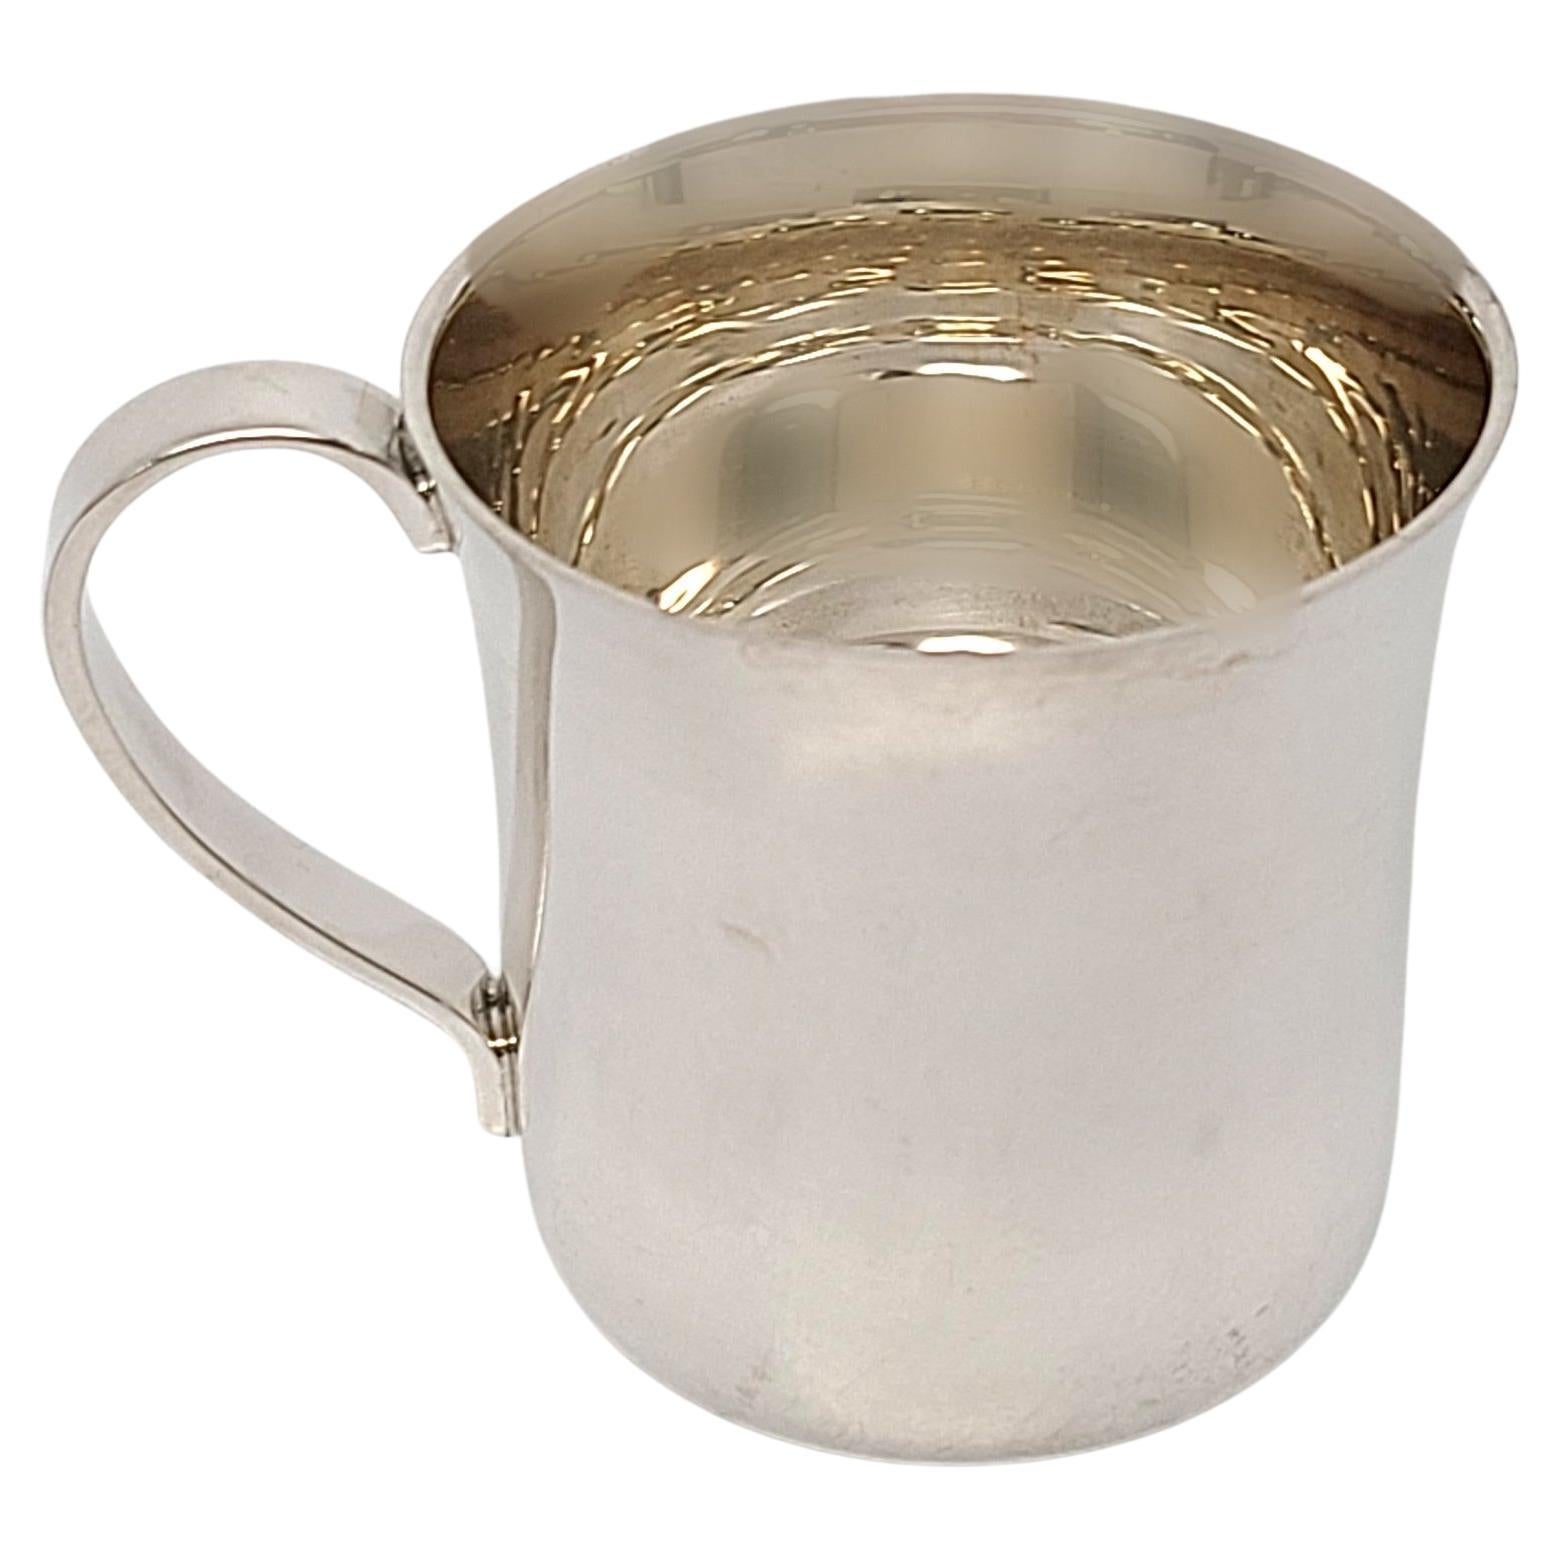 Tiffany & Co. Sterling Silver Baby Cup 23245